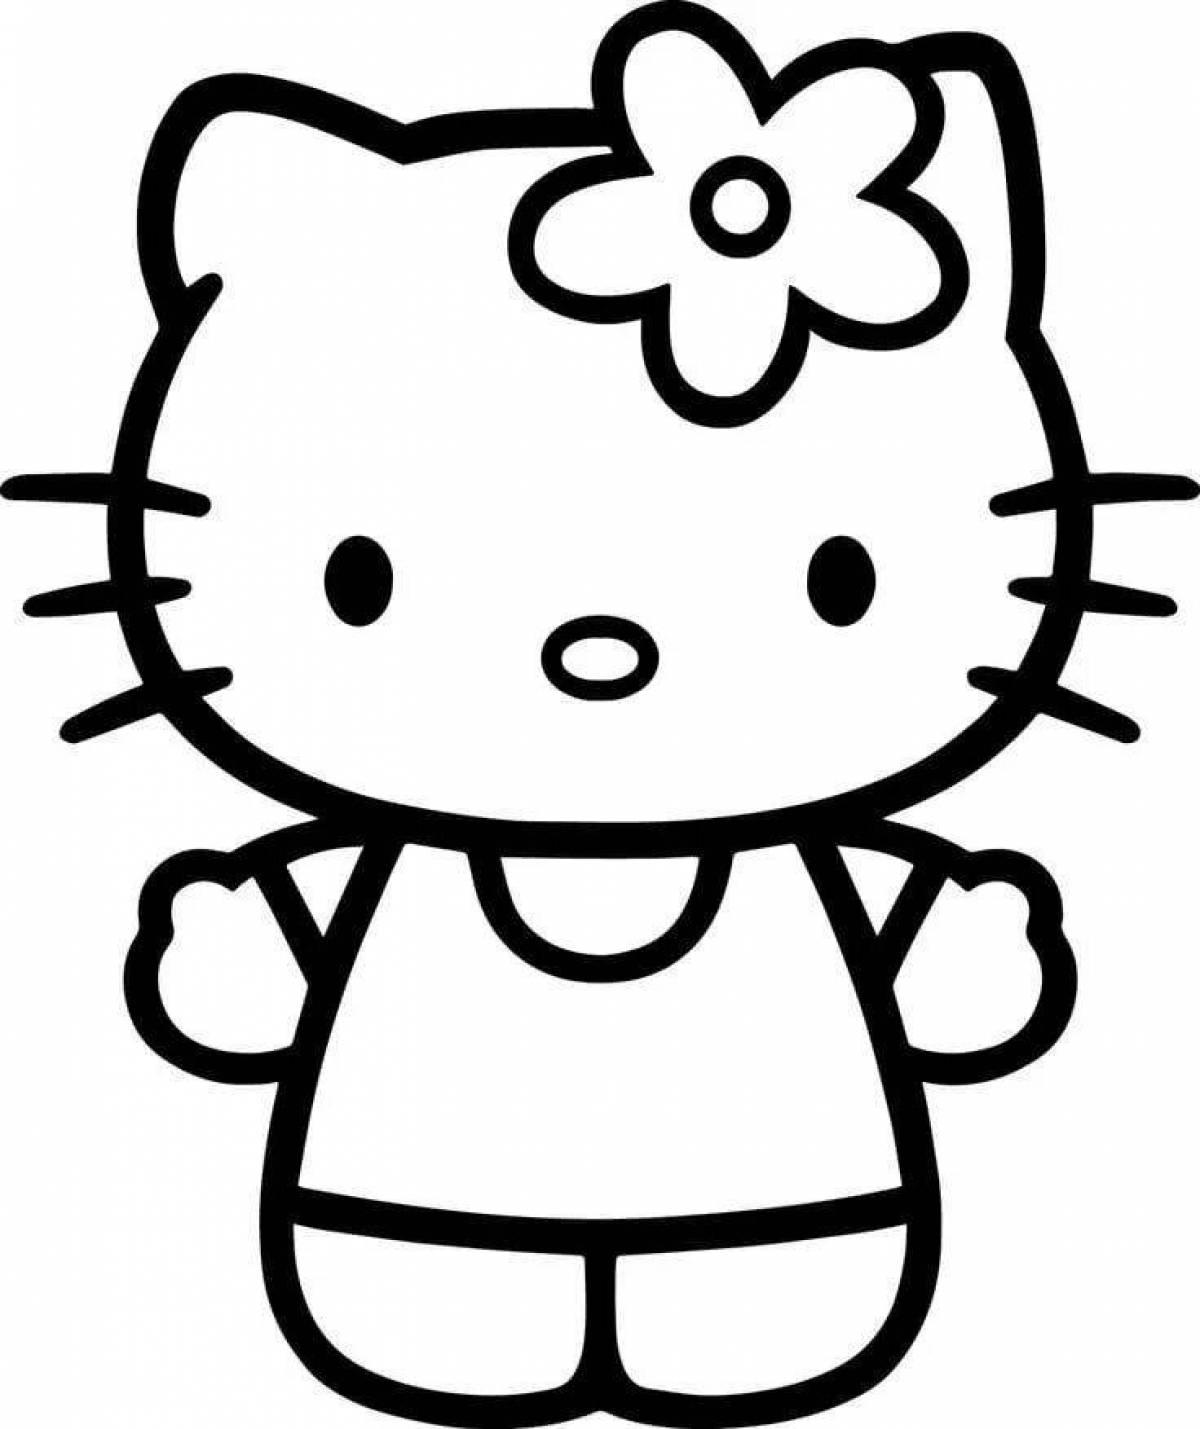 Fascinating hello kitty regular without bow and clothes